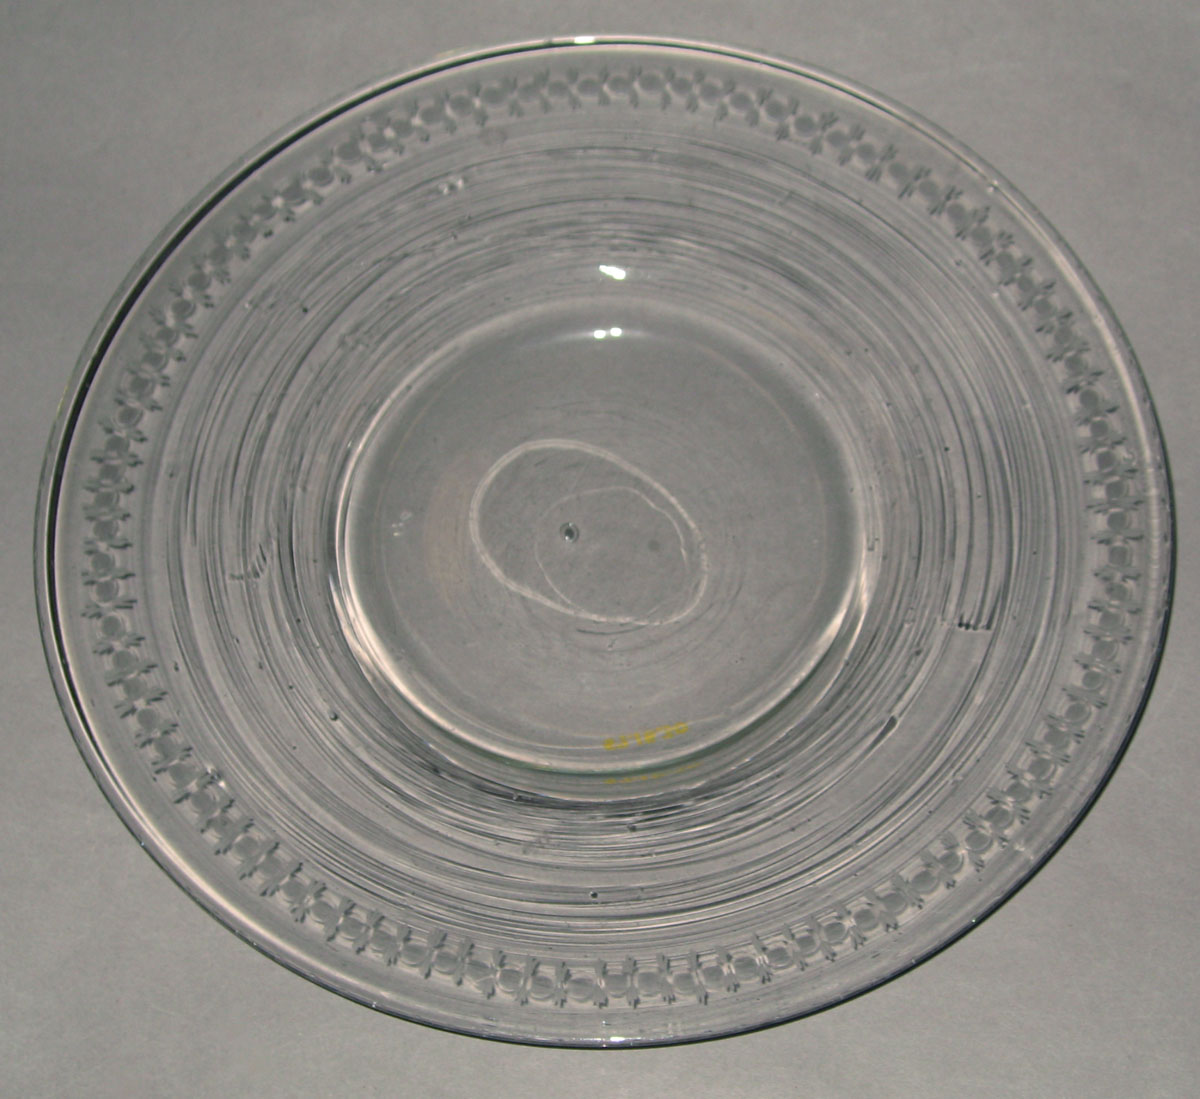 1957.0018.030 Colorless glass plate